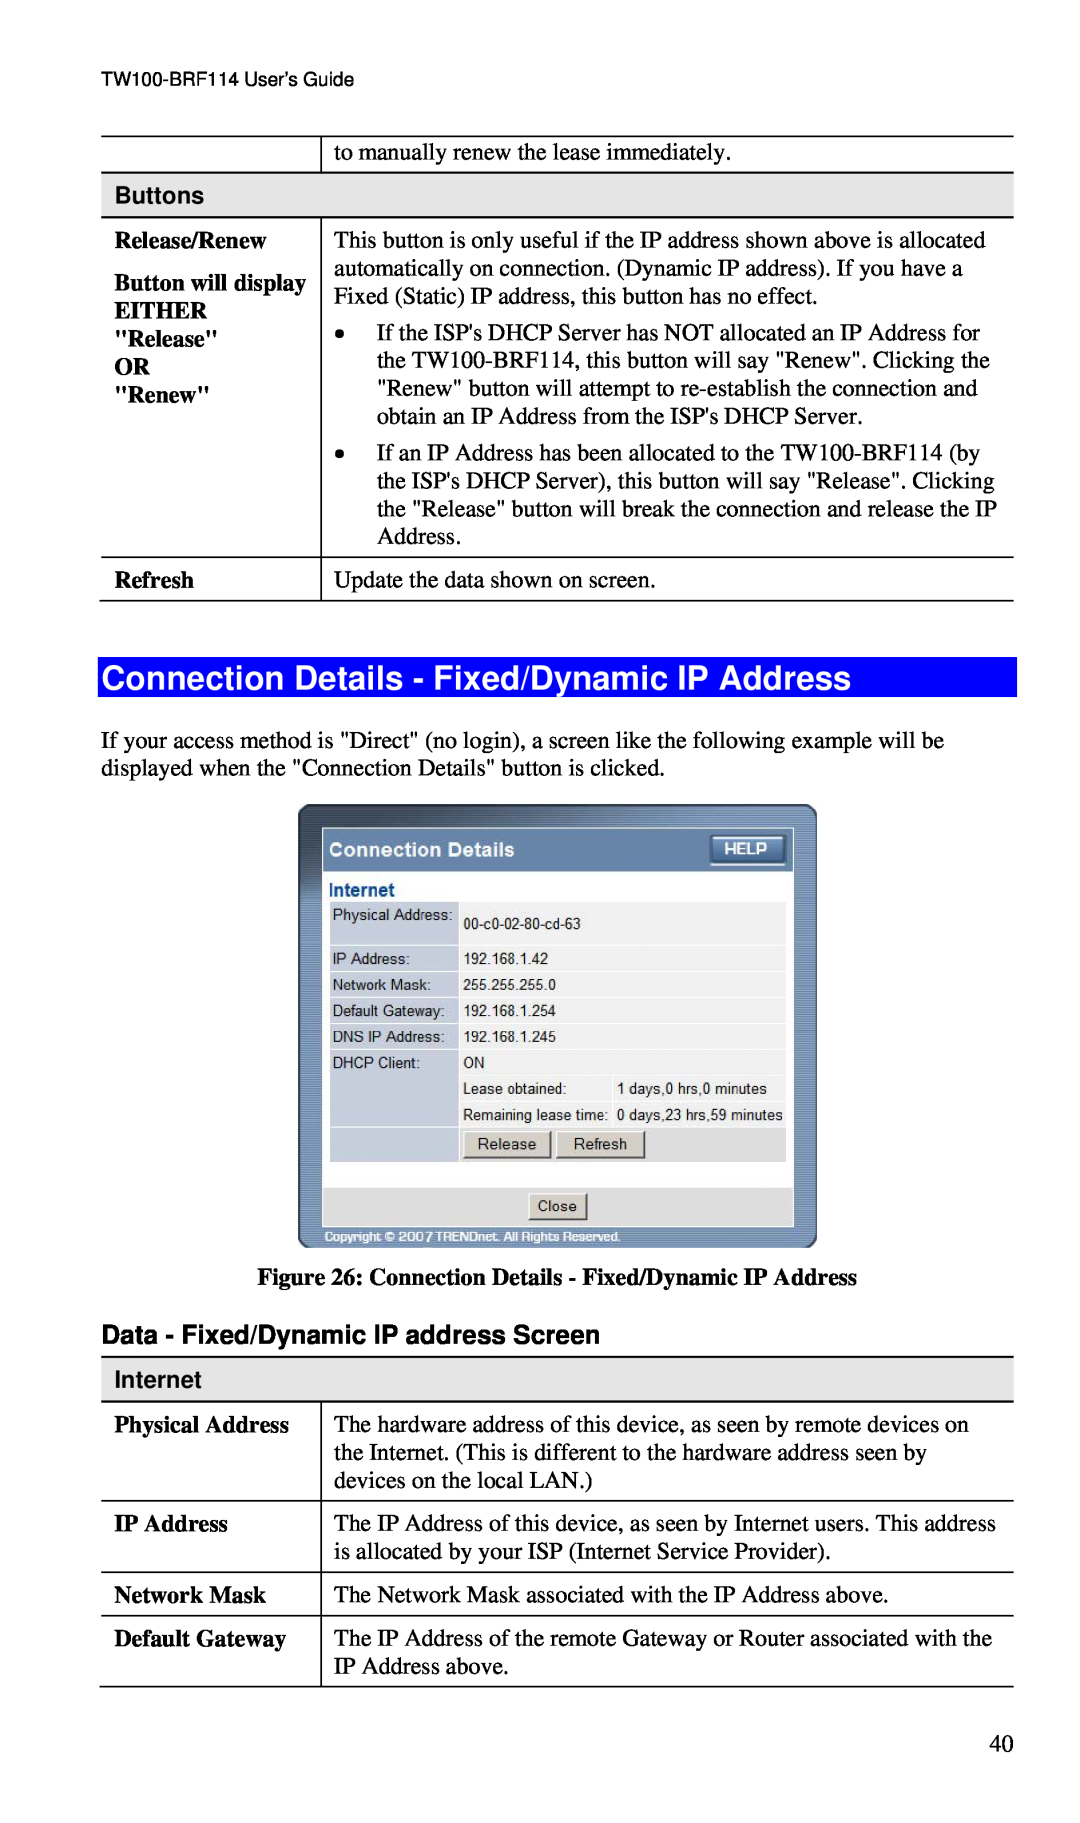 TRENDnet BRF114 manual Connection Details - Fixed/Dynamic IP Address, Buttons, Release/Renew, Button will display, Either 